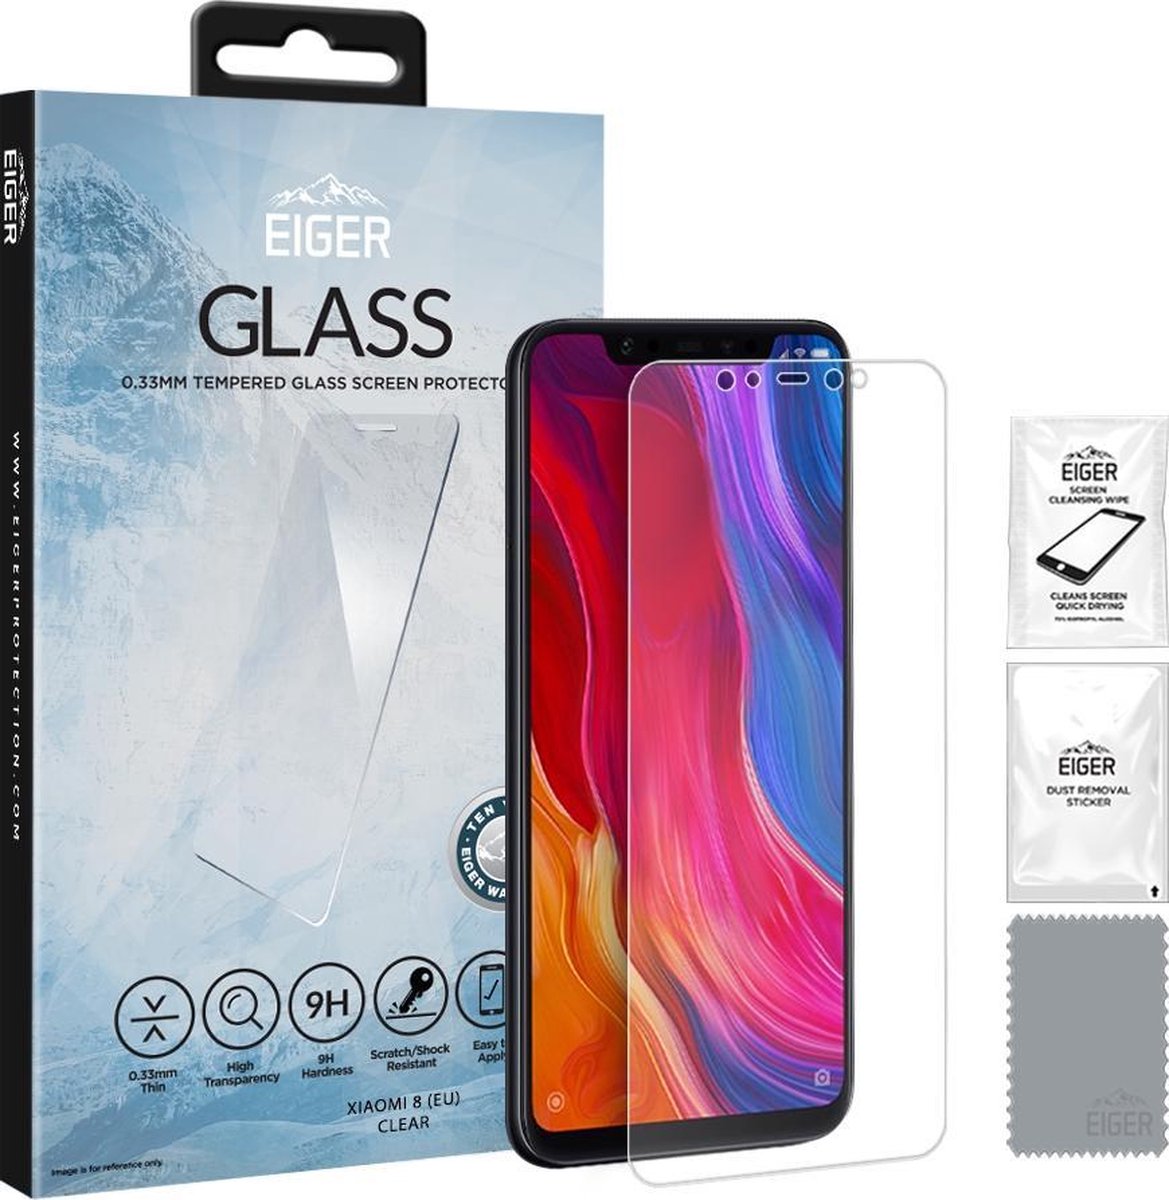 Eiger GLASS Tempered Glass Screen Protector - Clear - voor Xiaomi Mi 8